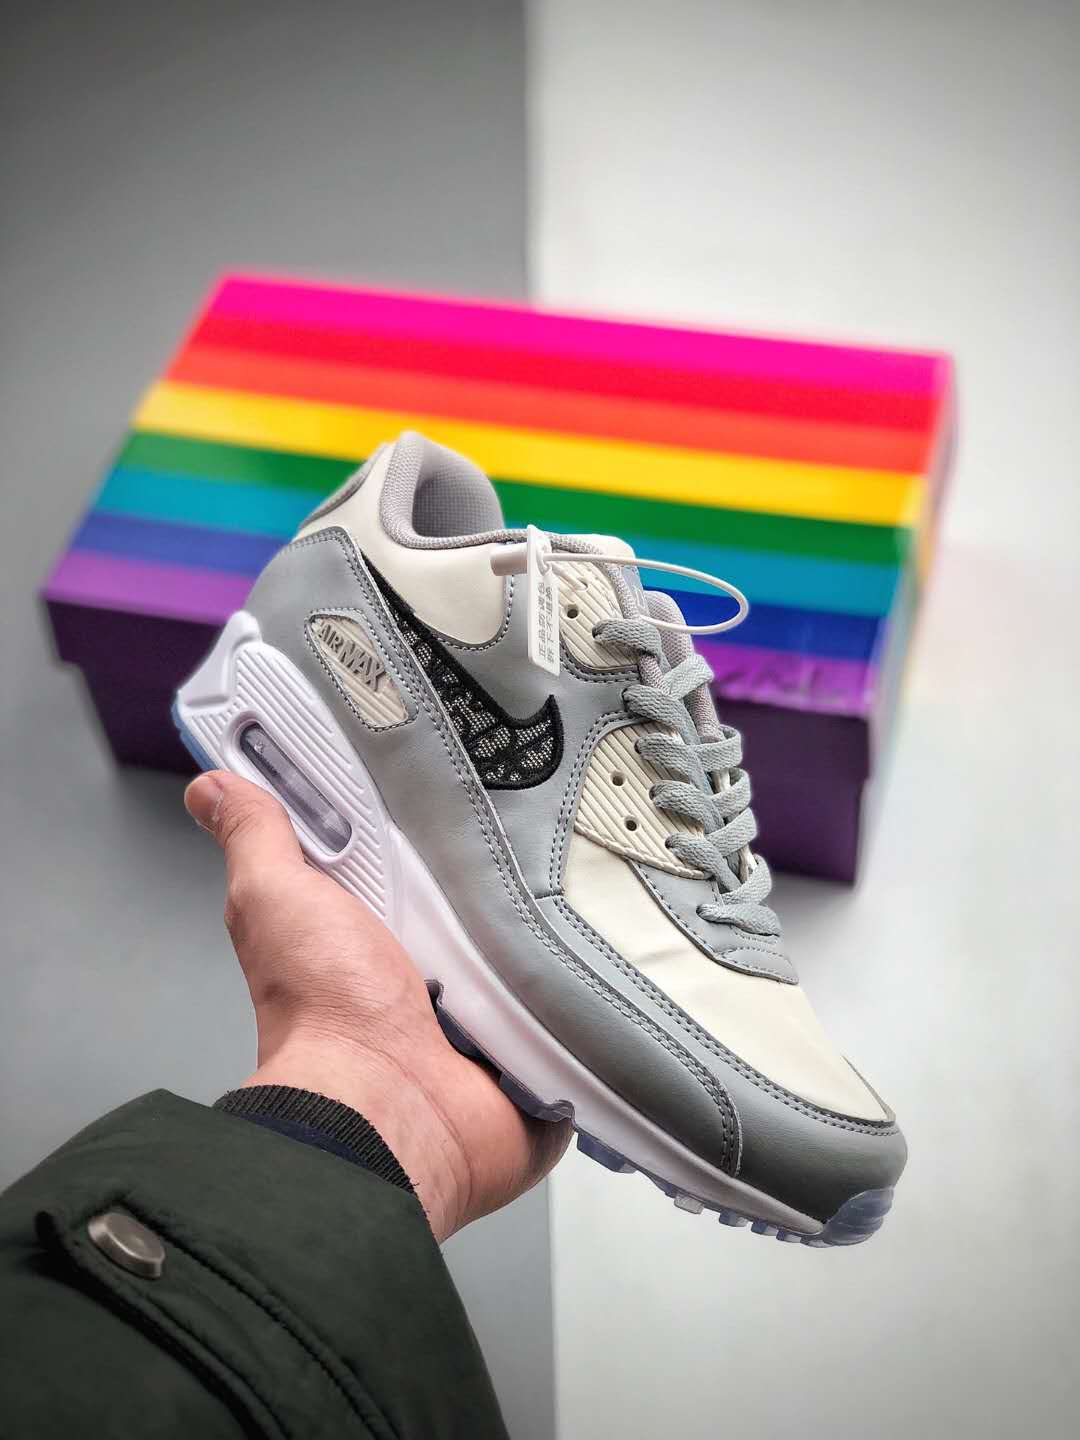 Nike Dior x Air Max 90 OG Grey CN8607-002 - Limited Edition Sneakers